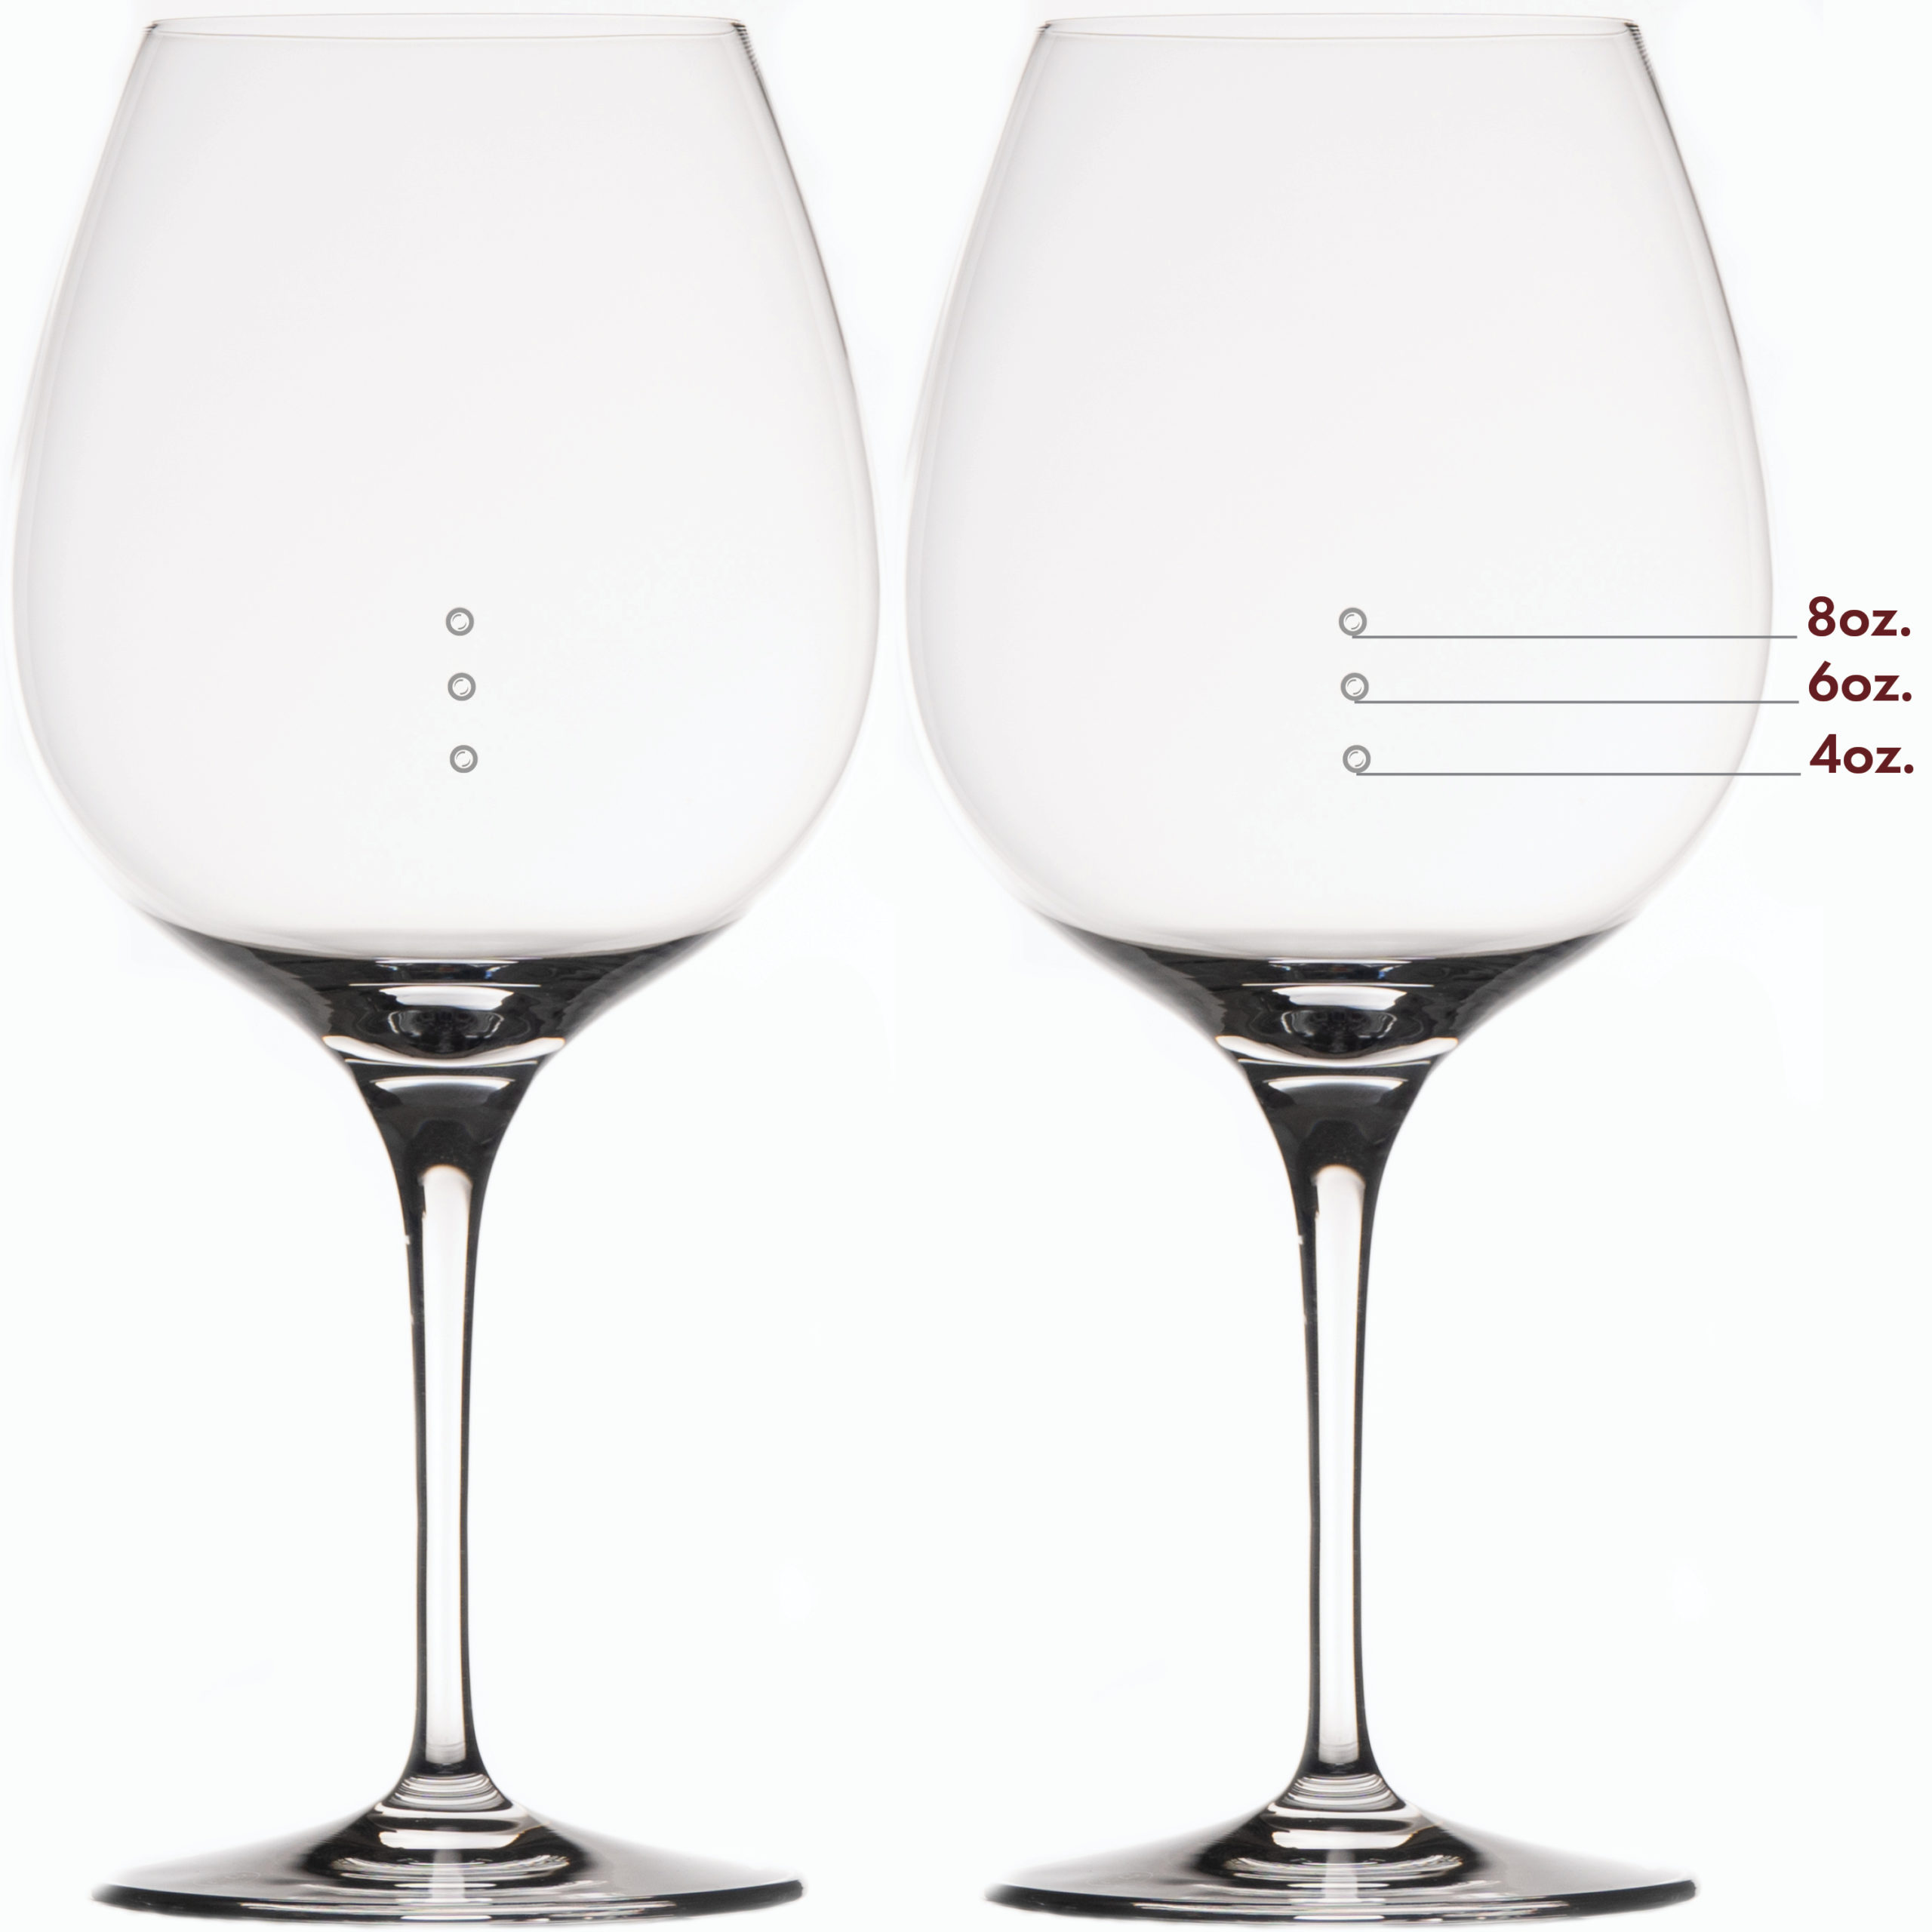 https://mr-picky.com/wp-content/uploads/2021/06/elegance-xl-pinot-noir-glass-with-measuring-marks-lines-scaled.jpg